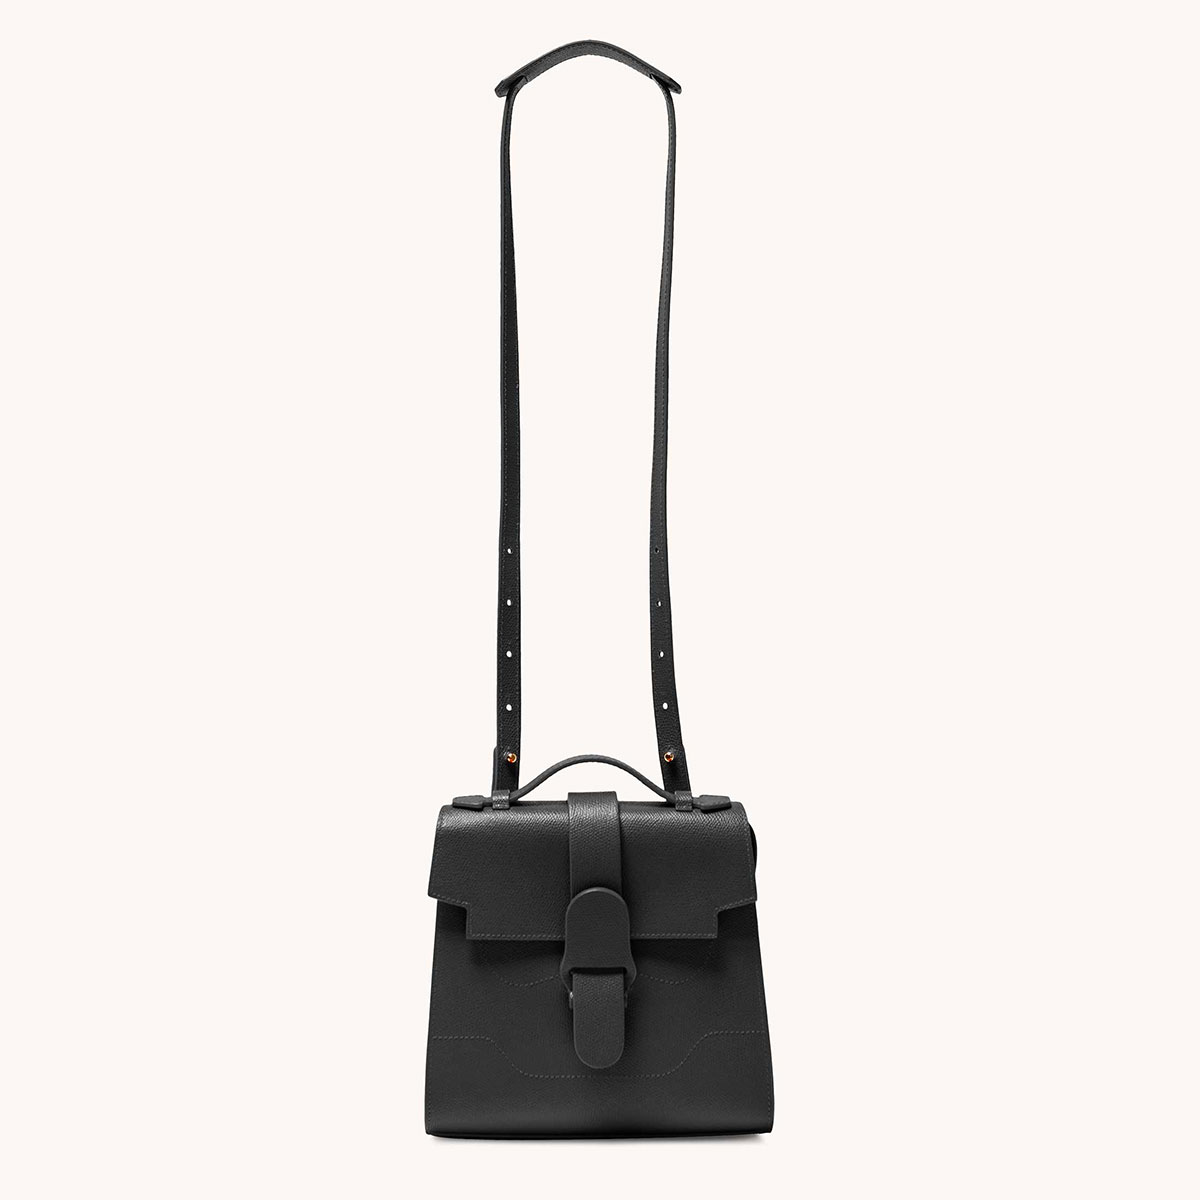 alunna bag pebbled noir front view with long strap